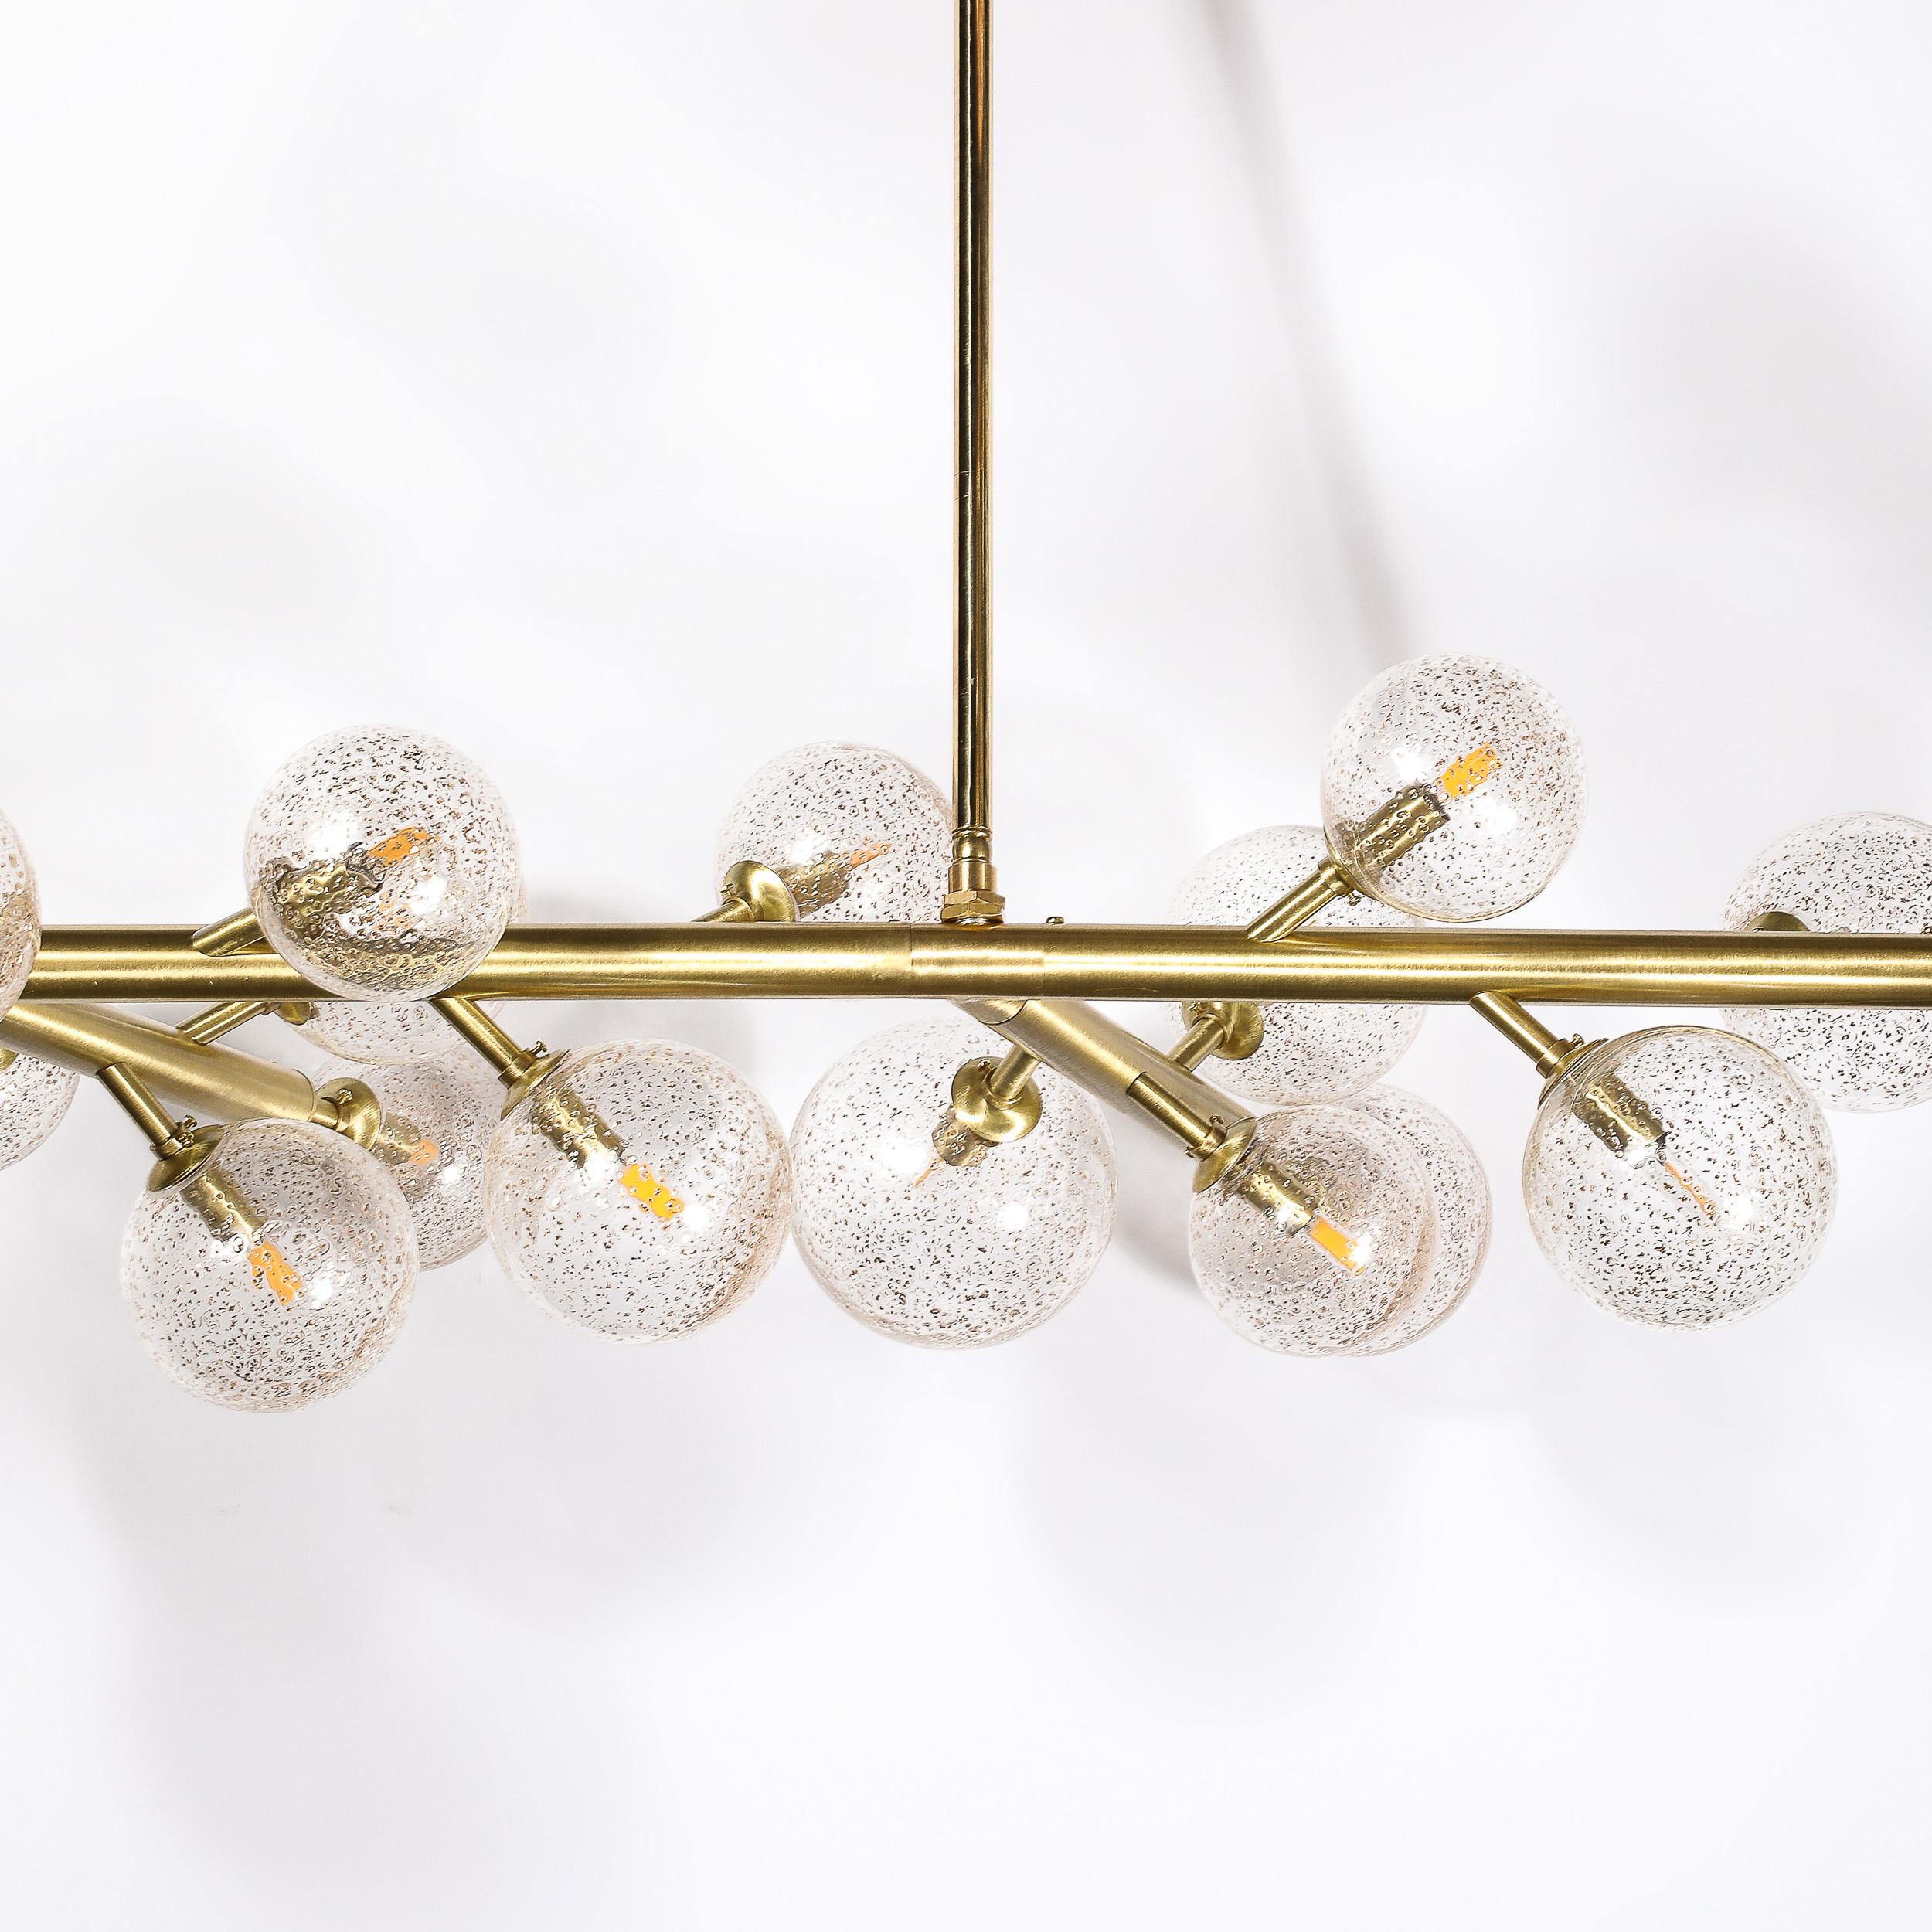 Custom Branch Form Hand-blown Murano Glass w/ 24k Gold & Brass Fitted Chandelier For Sale 5